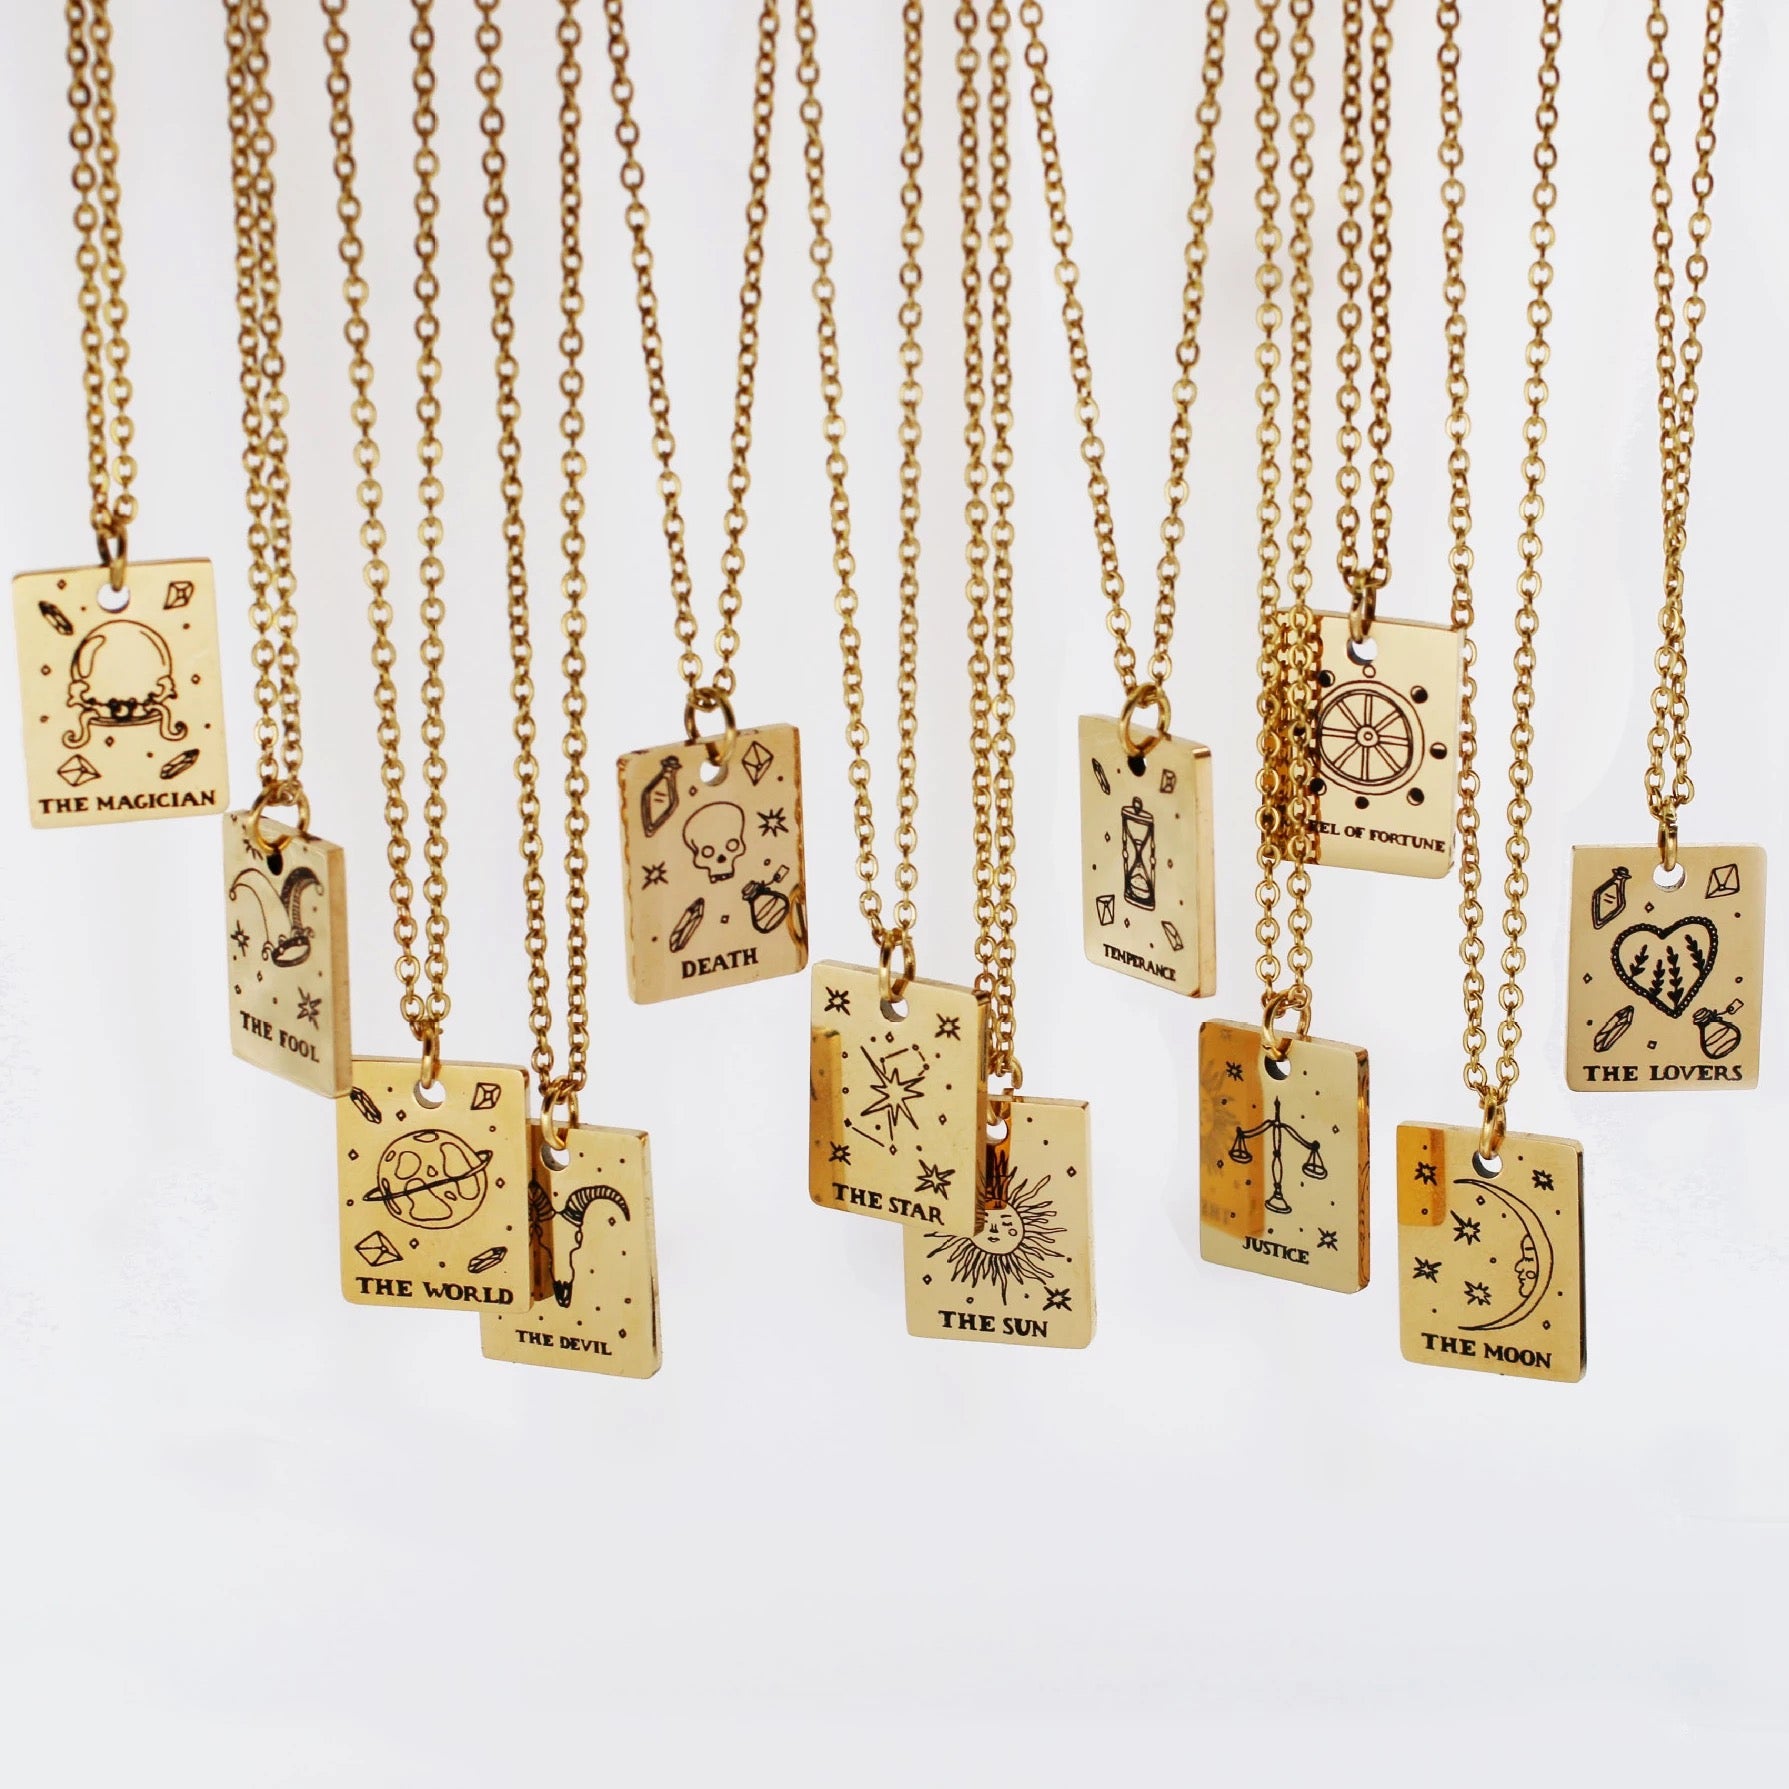 The world Tarot card gold necklace - Unisex gold plated metaphysical necklace